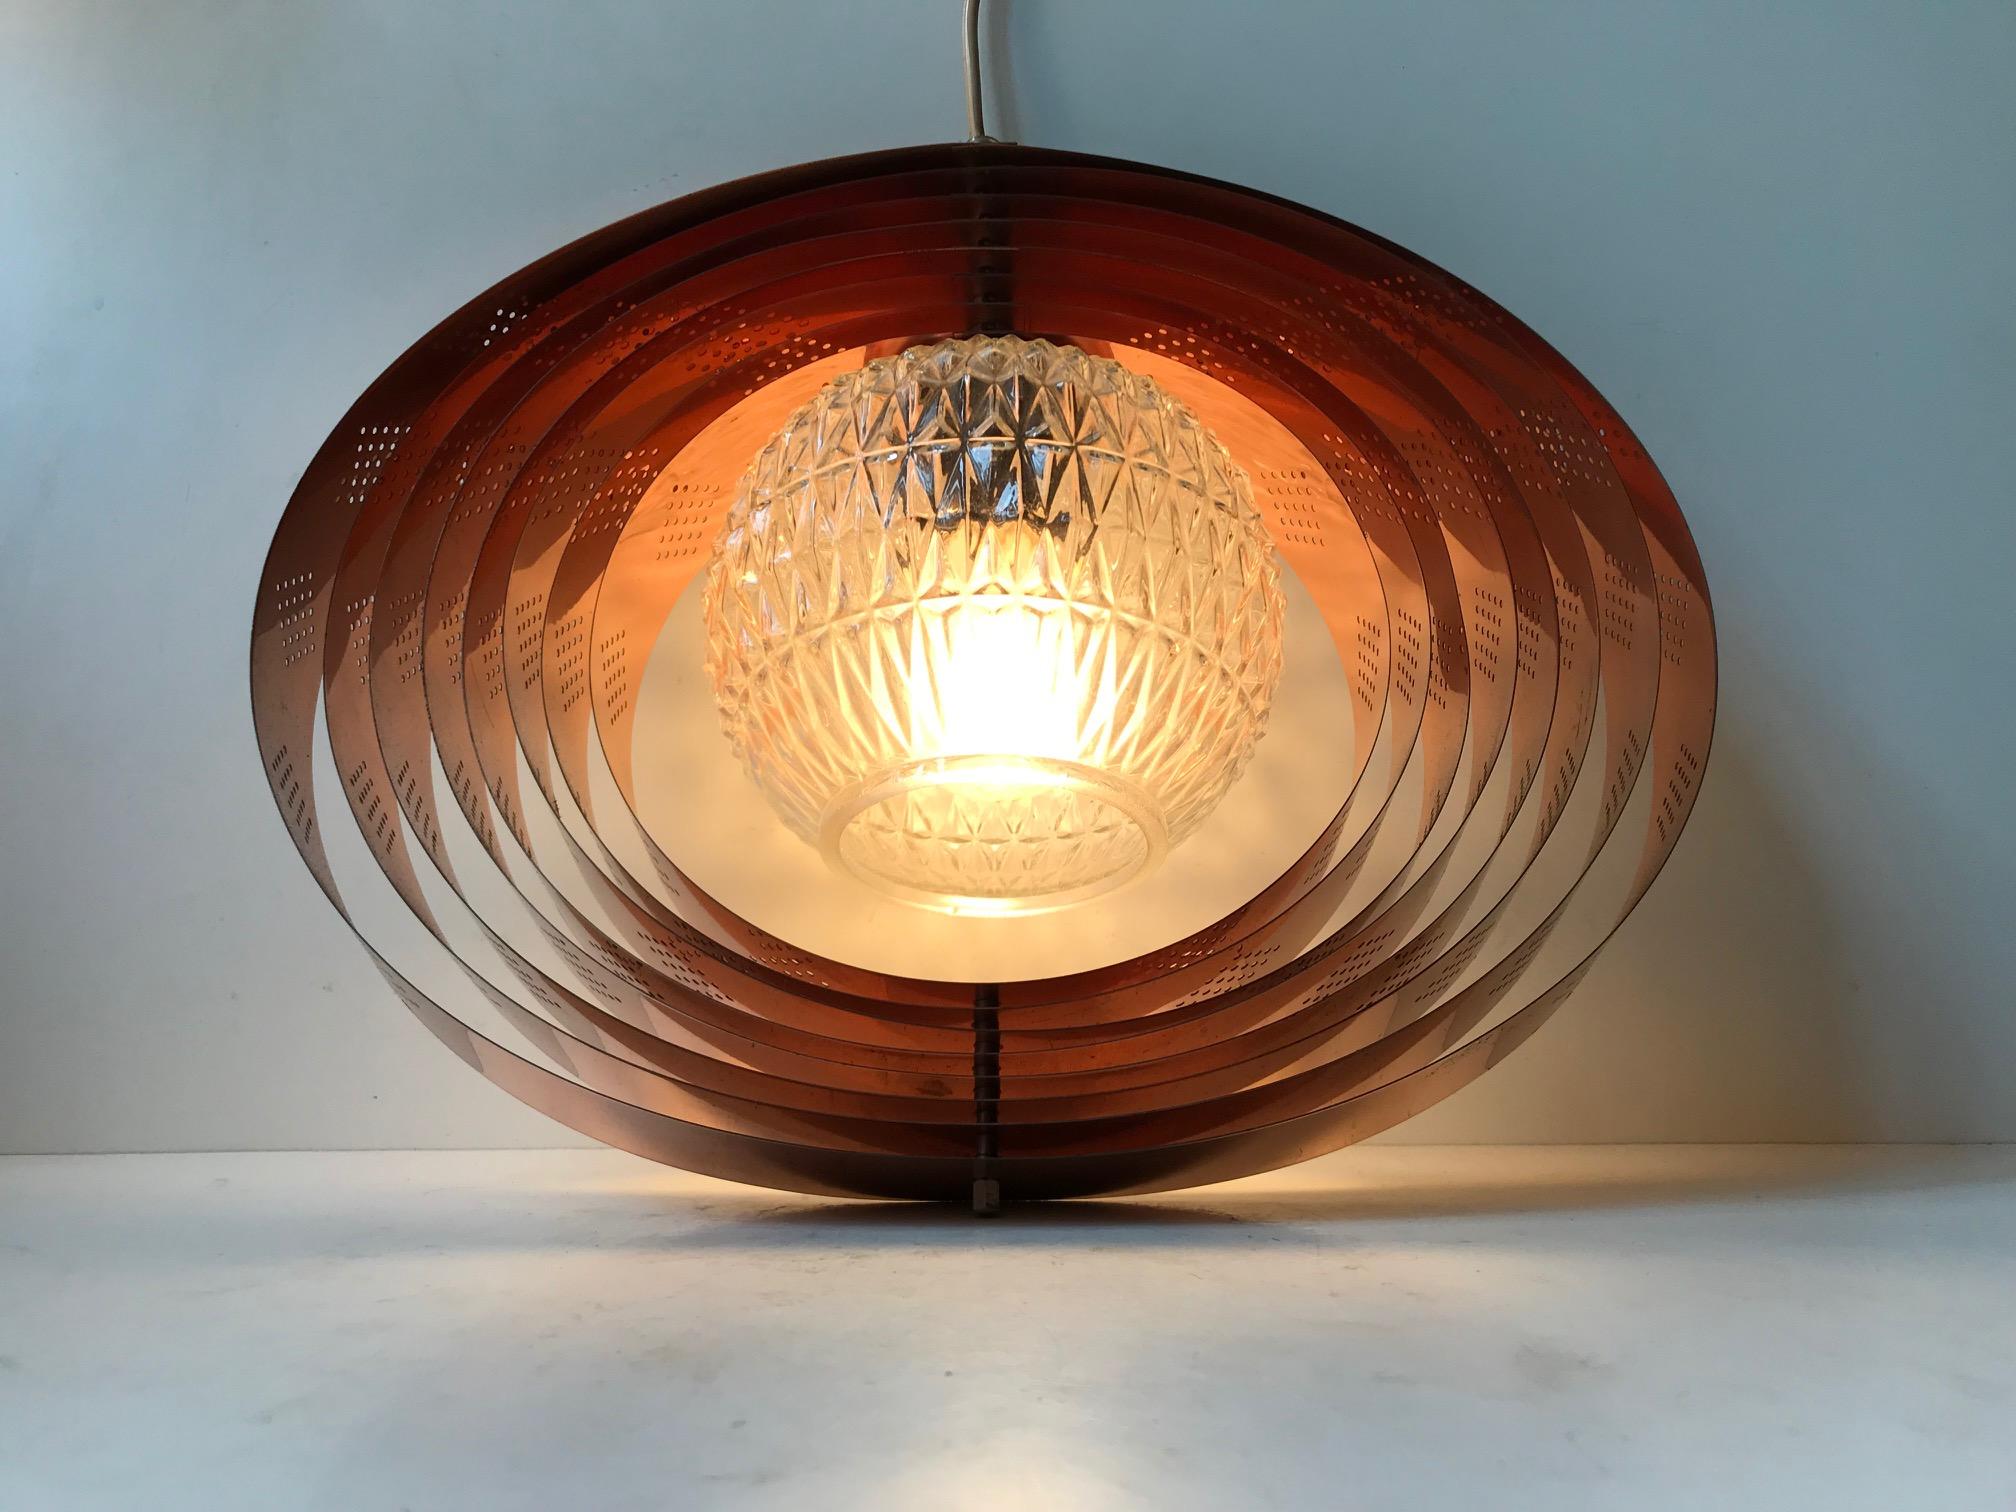 A rare Danish hanging light composed of rotating/modular copper rings and a centre shade in pressed glass. This Space Age design enables you to create a variety of different shapes. The most obvious ones being a moon or the outlines of the planet